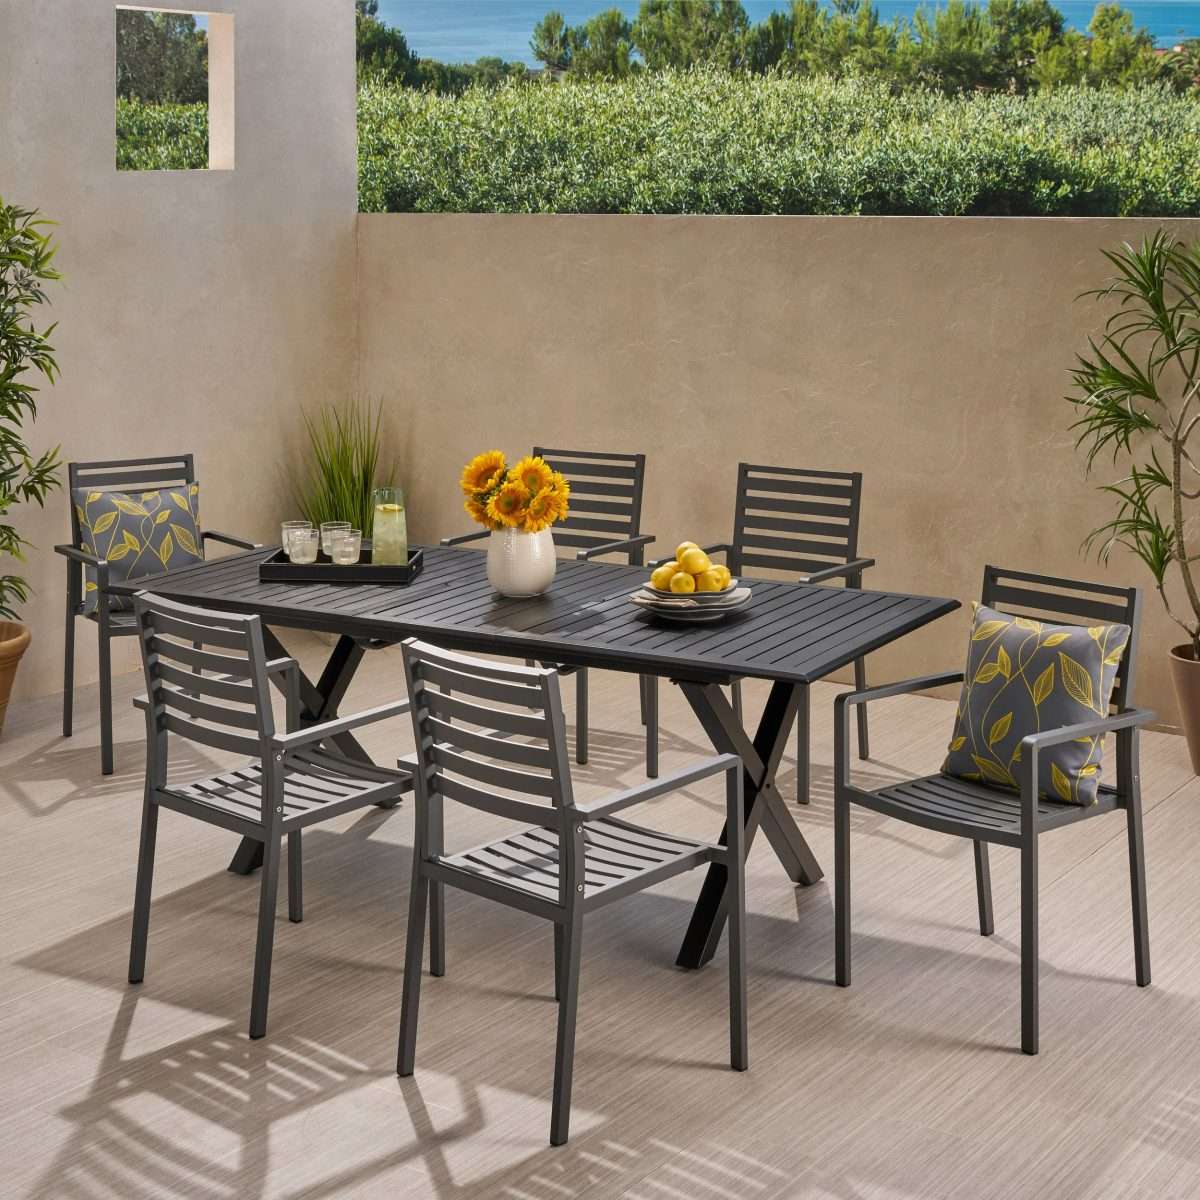 Noxx Outdoor Modern 6 Seater Aluminum Dining Set with Expandable Table ...